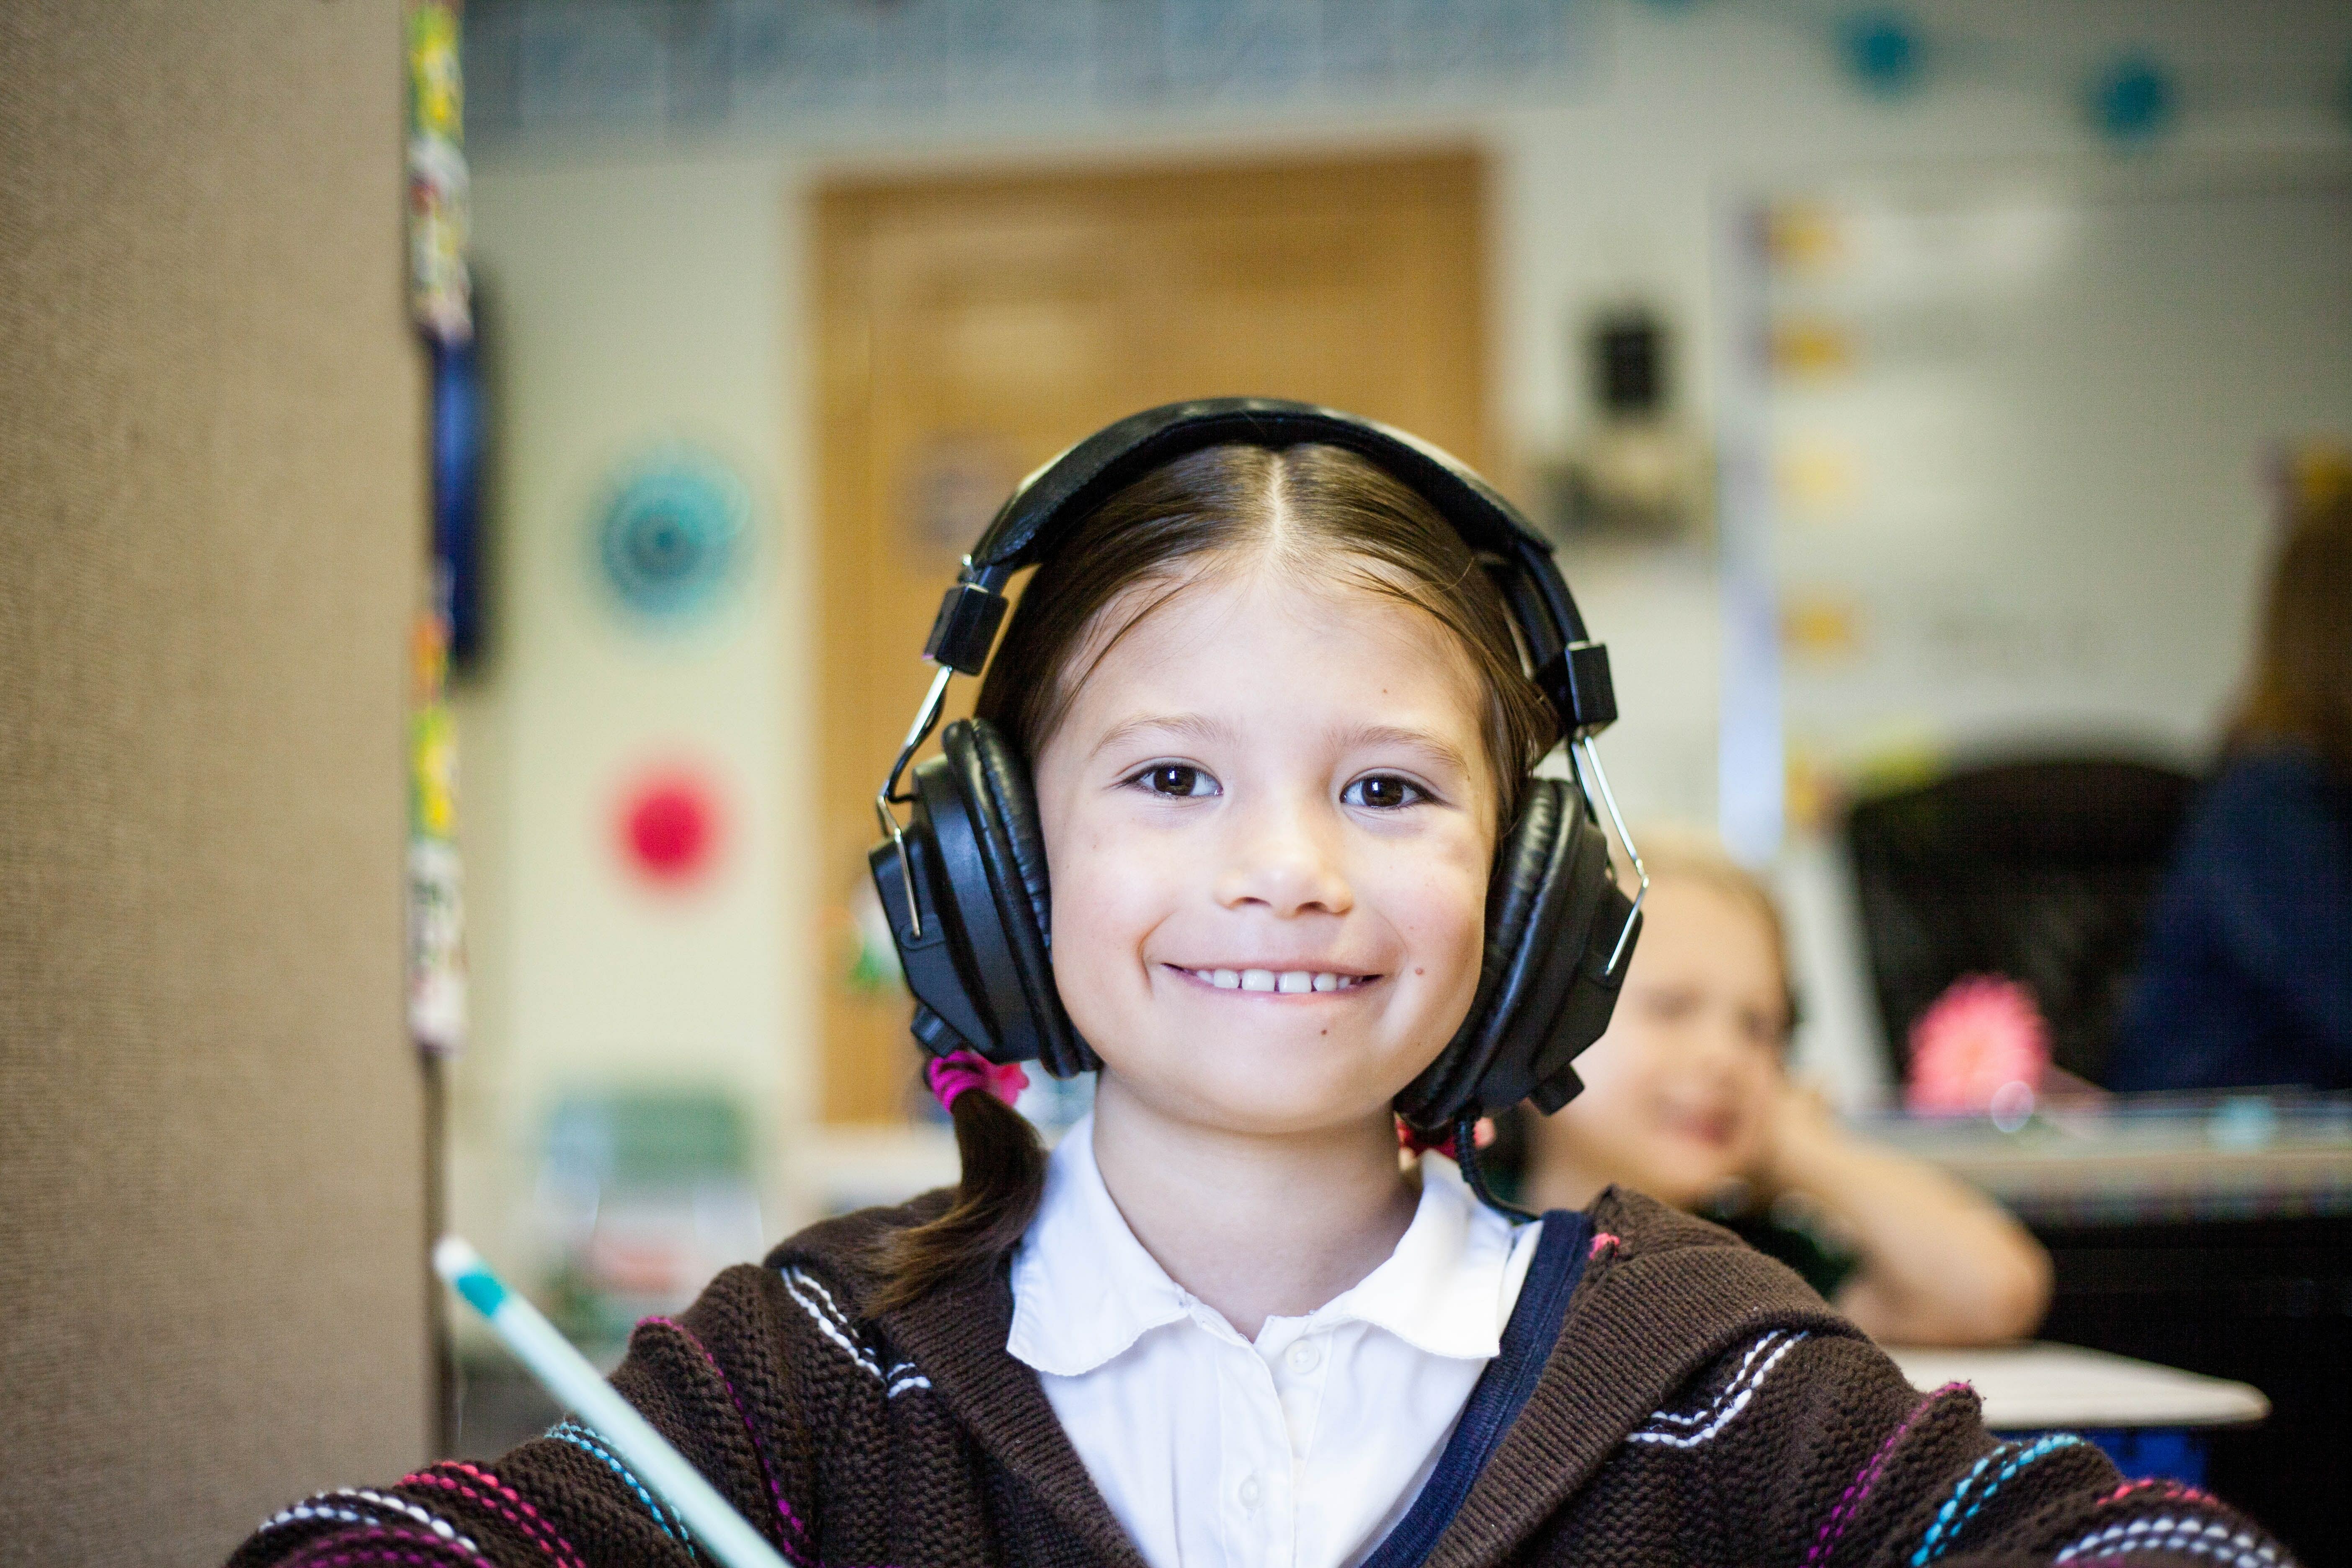 A child wearing a headset